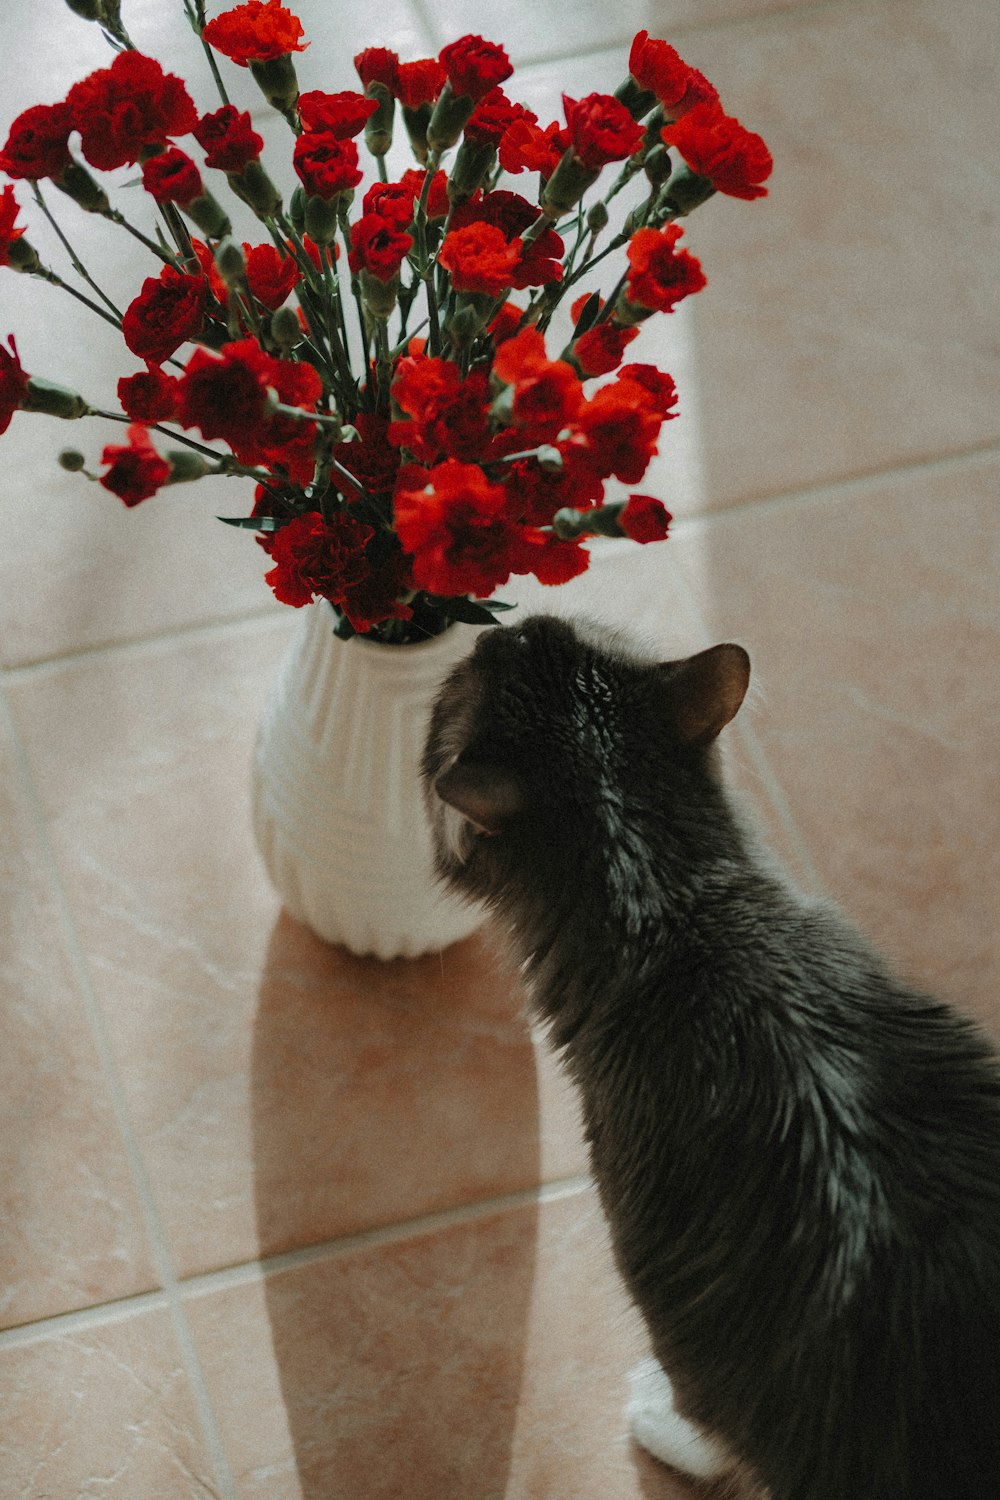 a cat sniffing a vase with red flowers in it